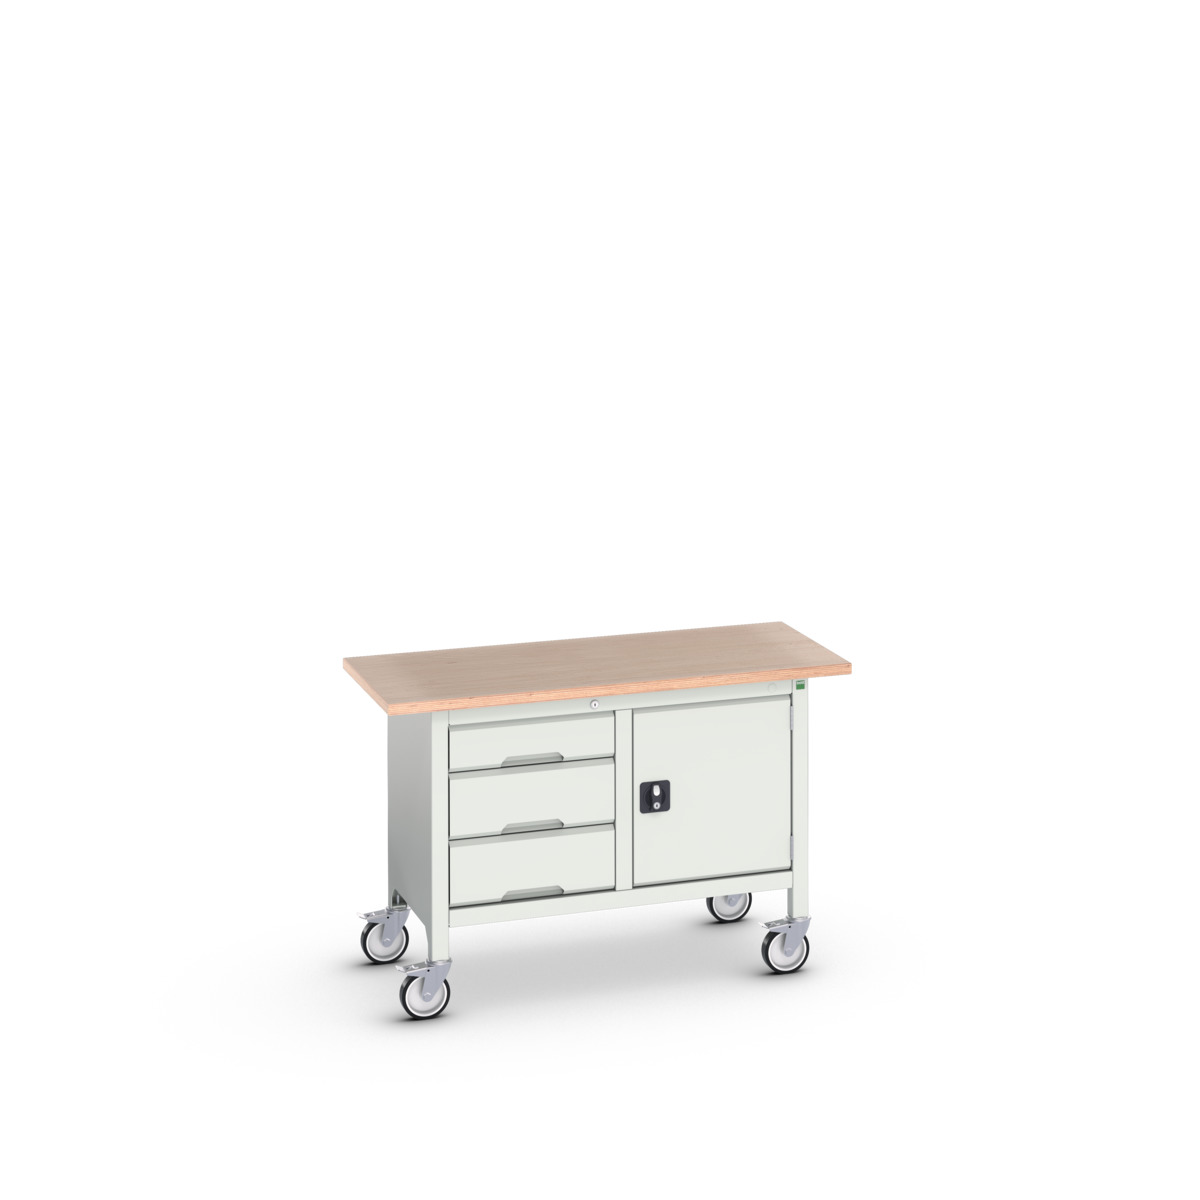 16923203.16 - verso mobile storage bench (mpx)